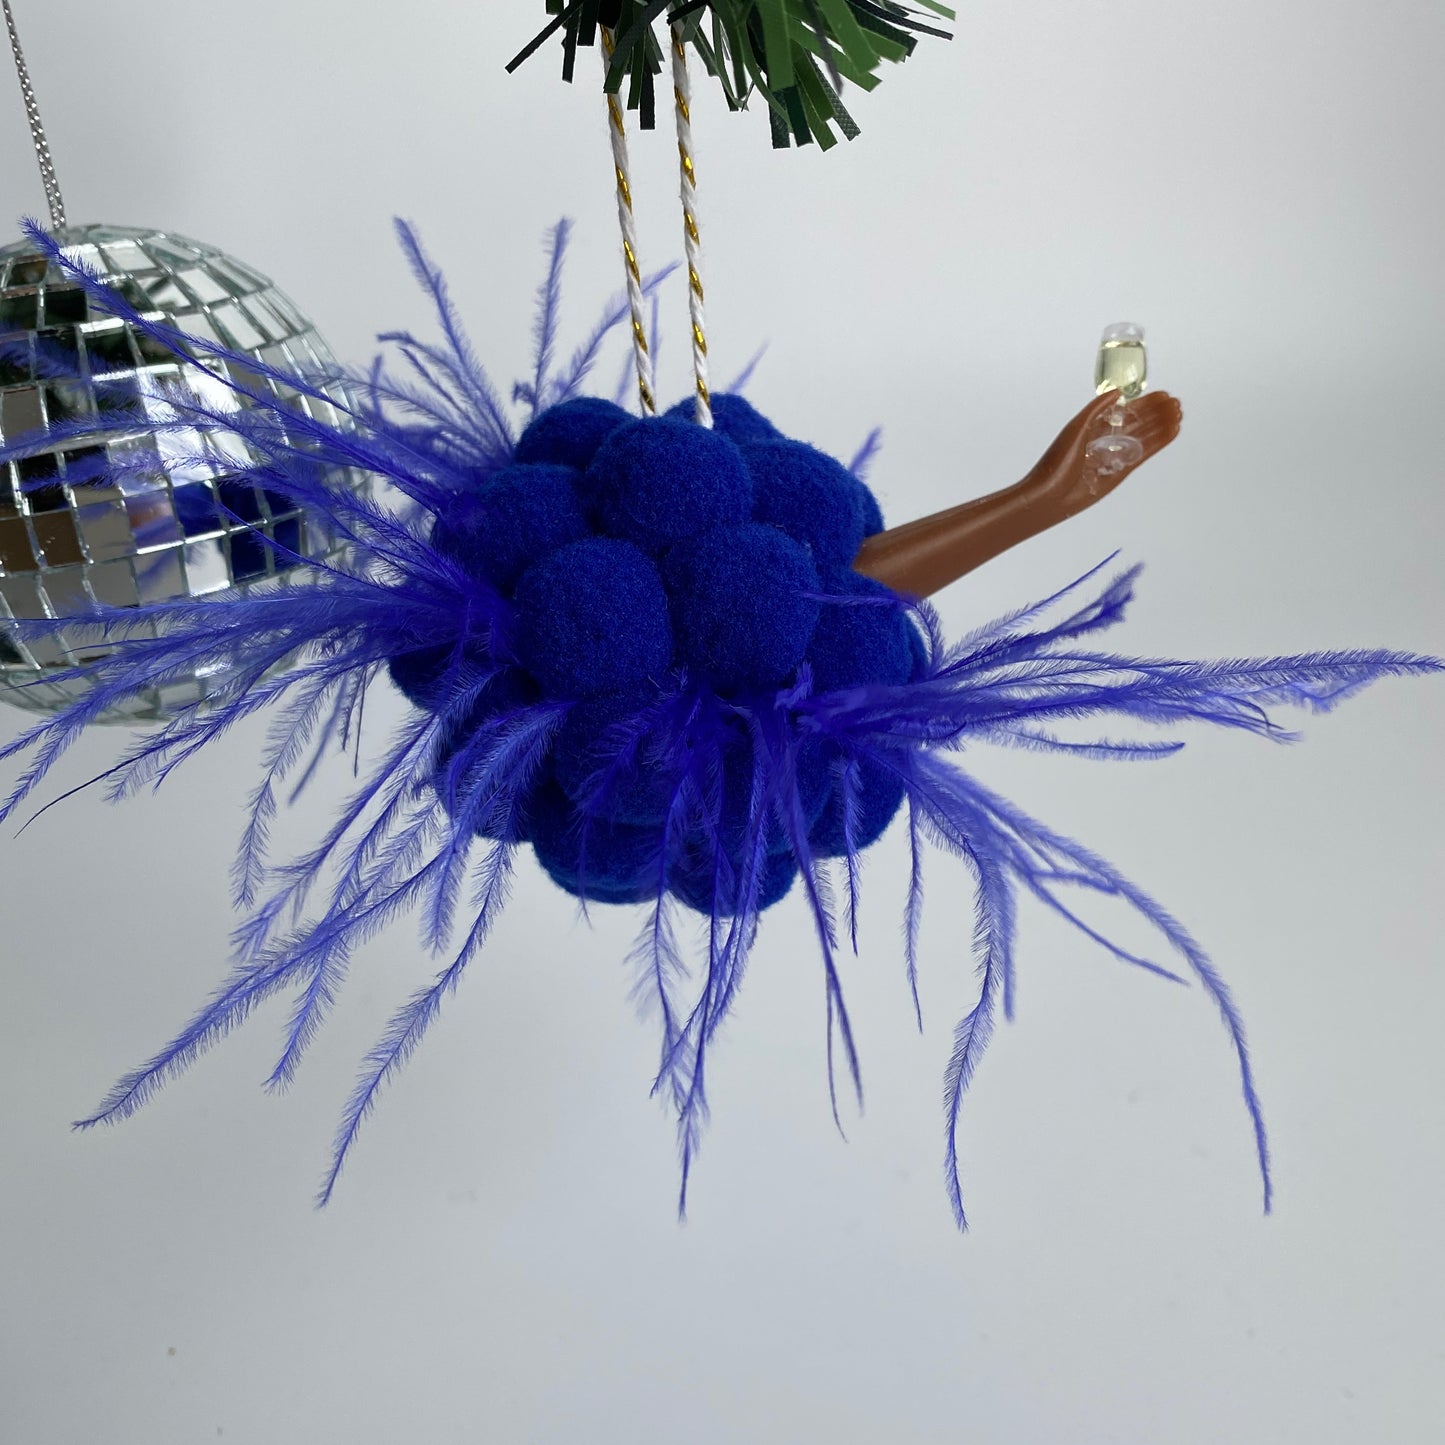 Life ball Diva - Blue - more options available